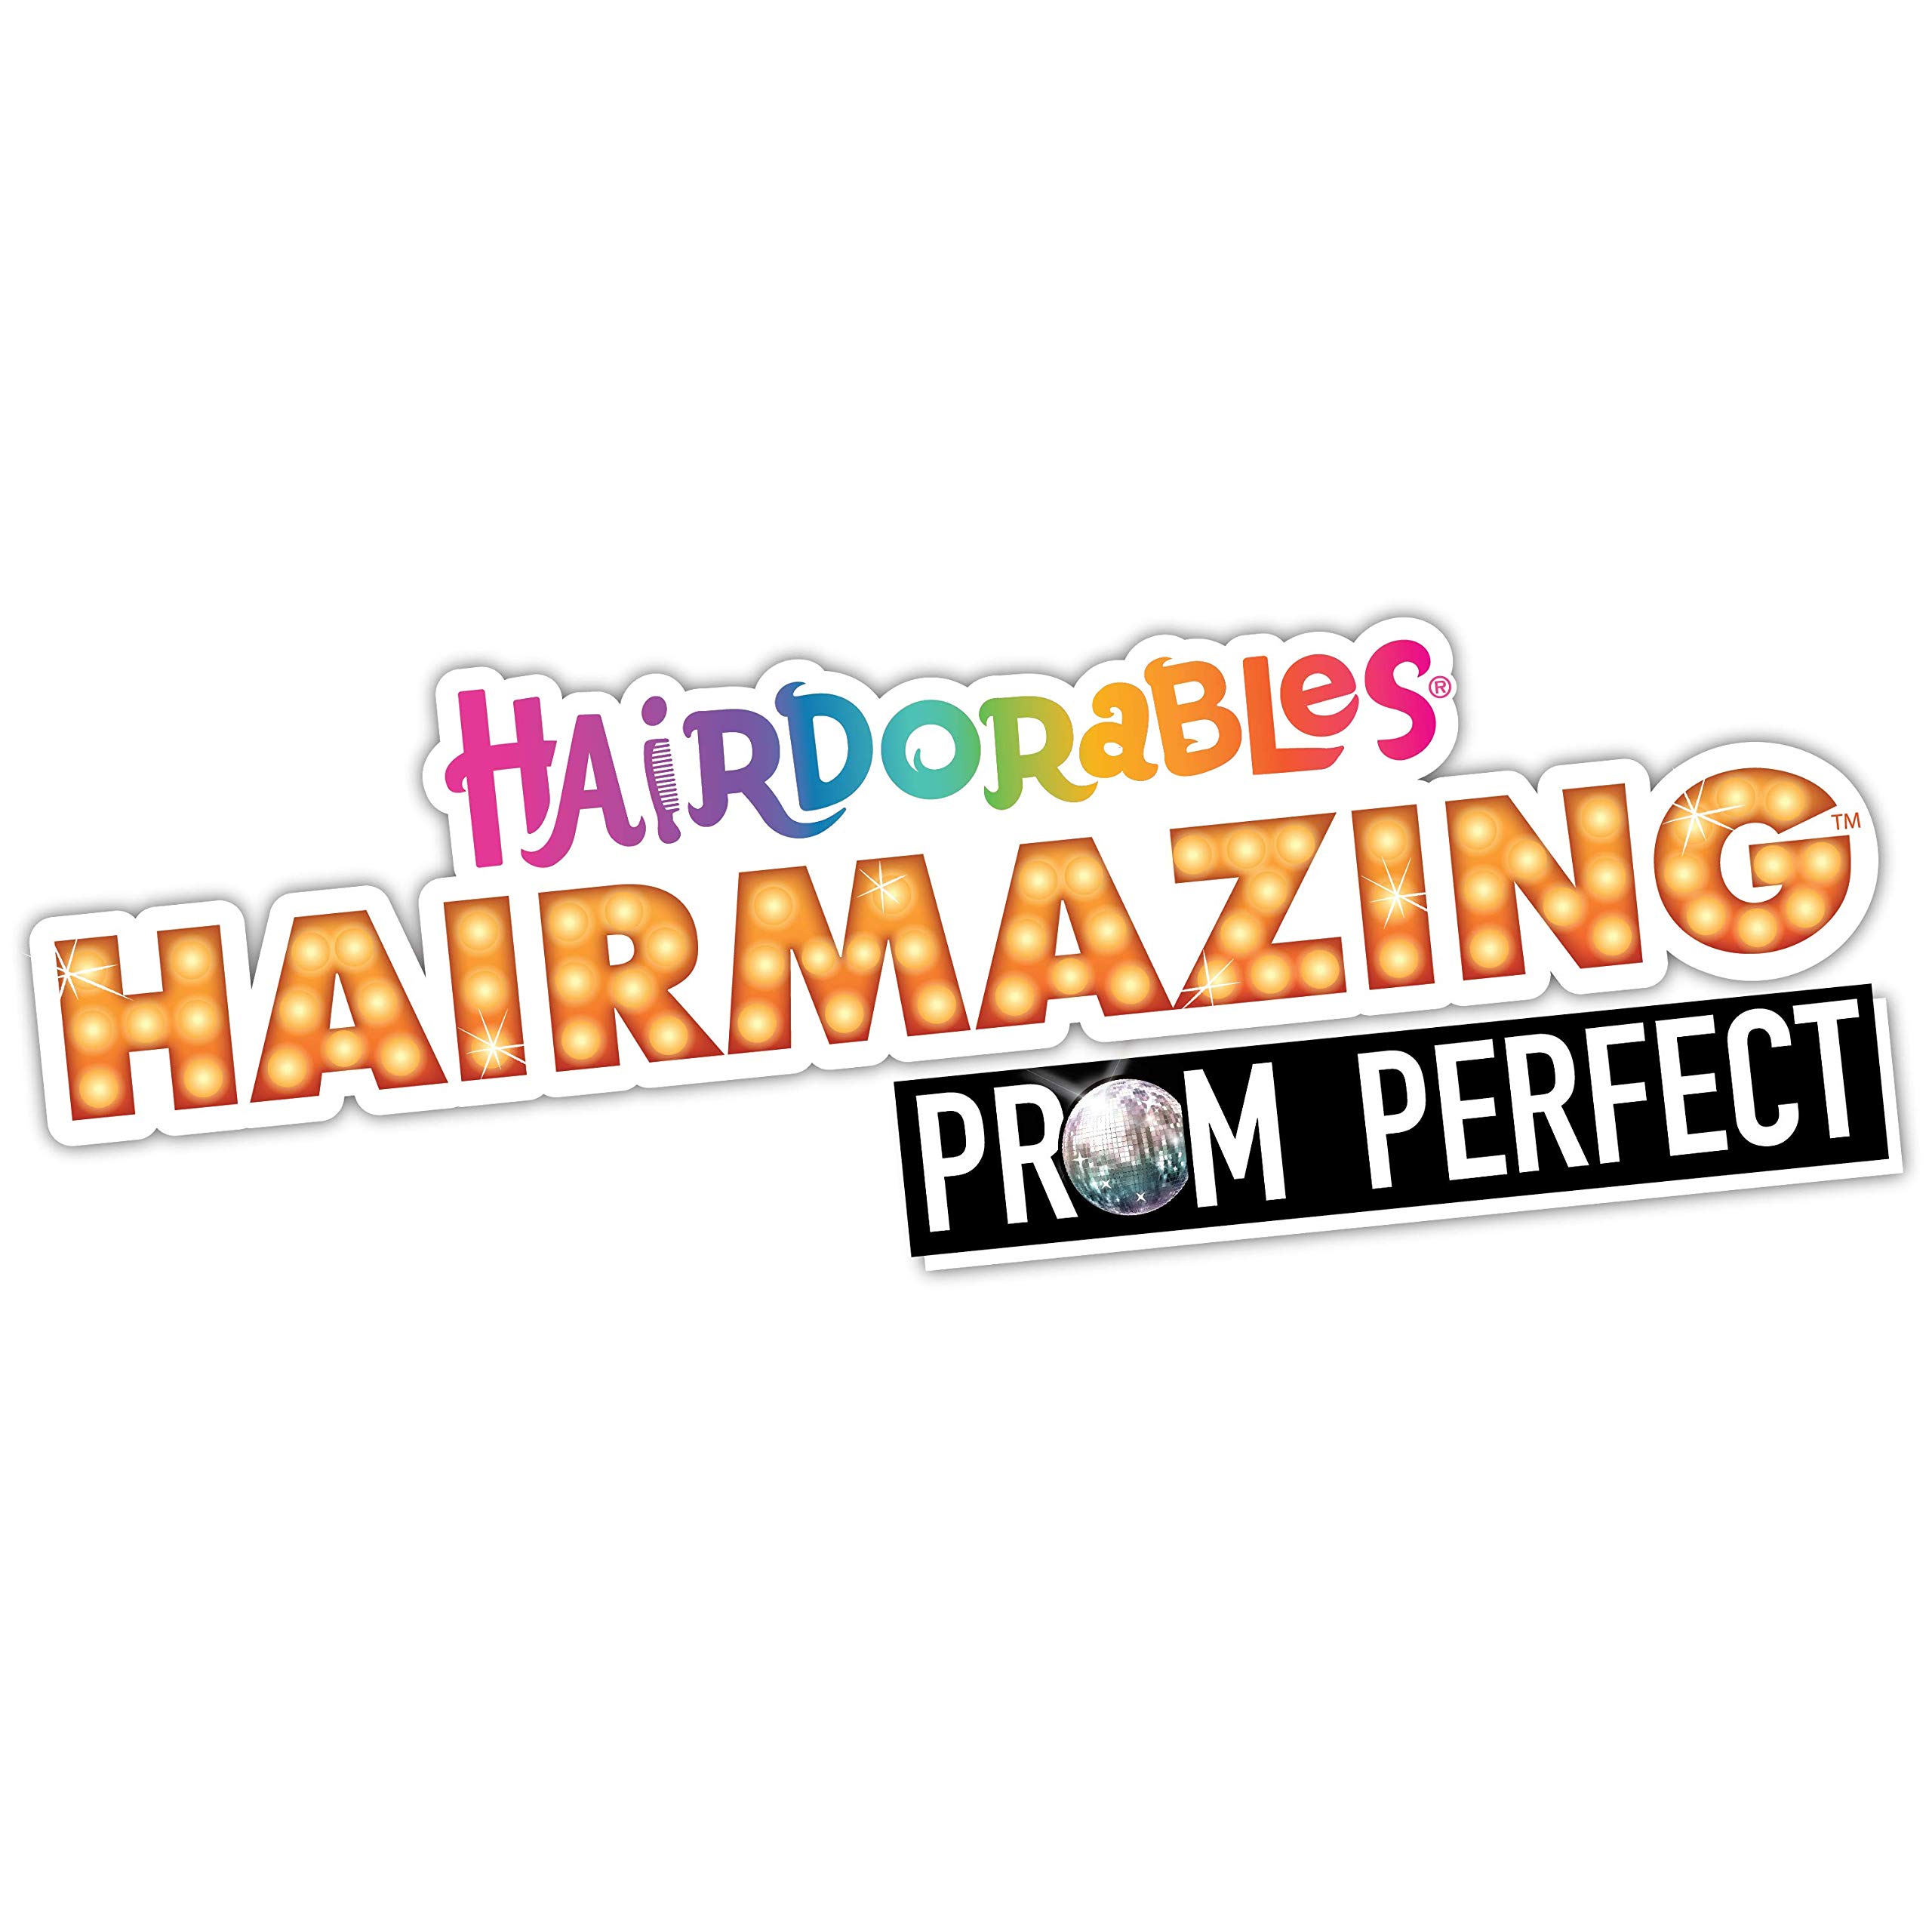 Hairdorables Hairmazing Prom Perfect Fashion Dolls, Willow, Pink and Green Hair, Kids Toys for Ages 3 Up, Gifts and Presents by Just Play